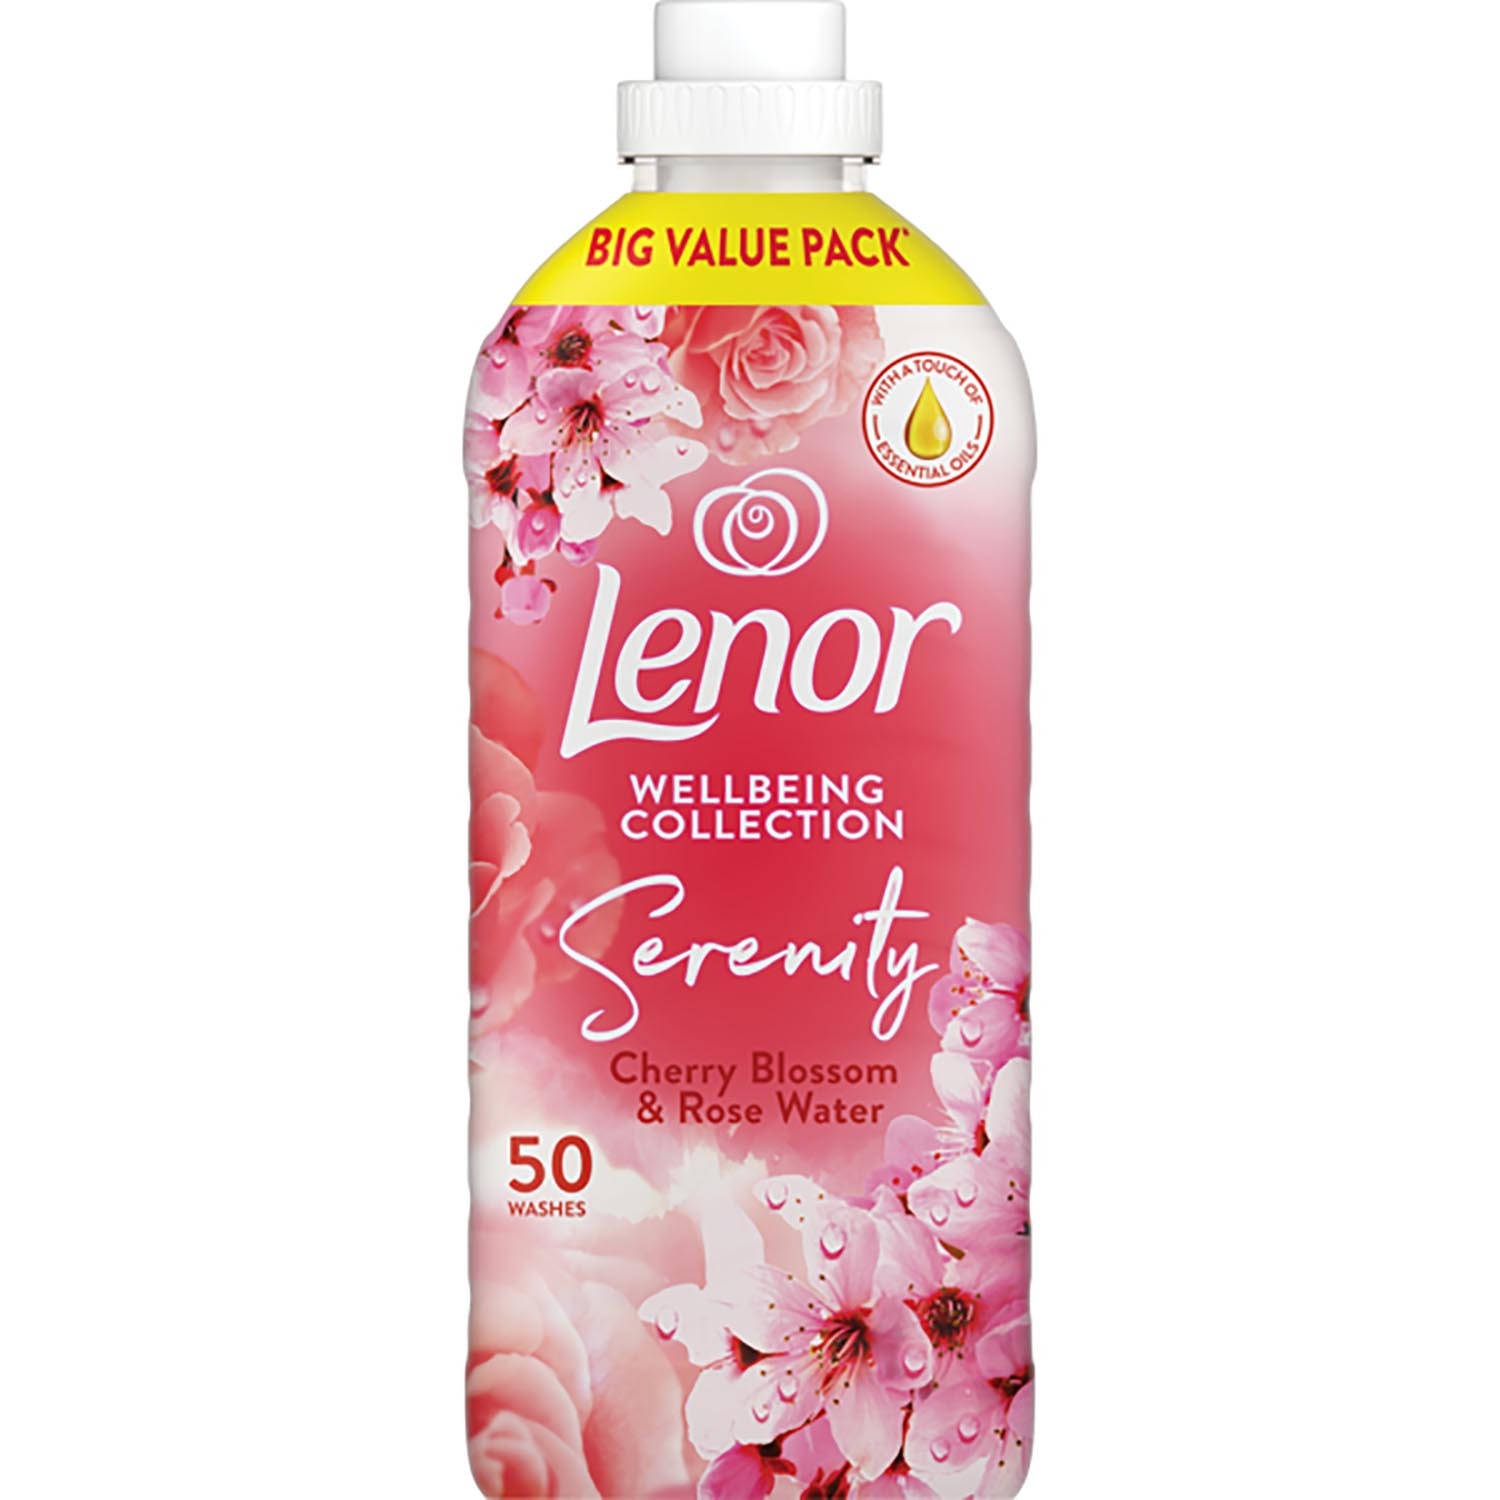 Single Lenor Wellbeing Collection Fabric Conditioner in Assorted styles Image 1